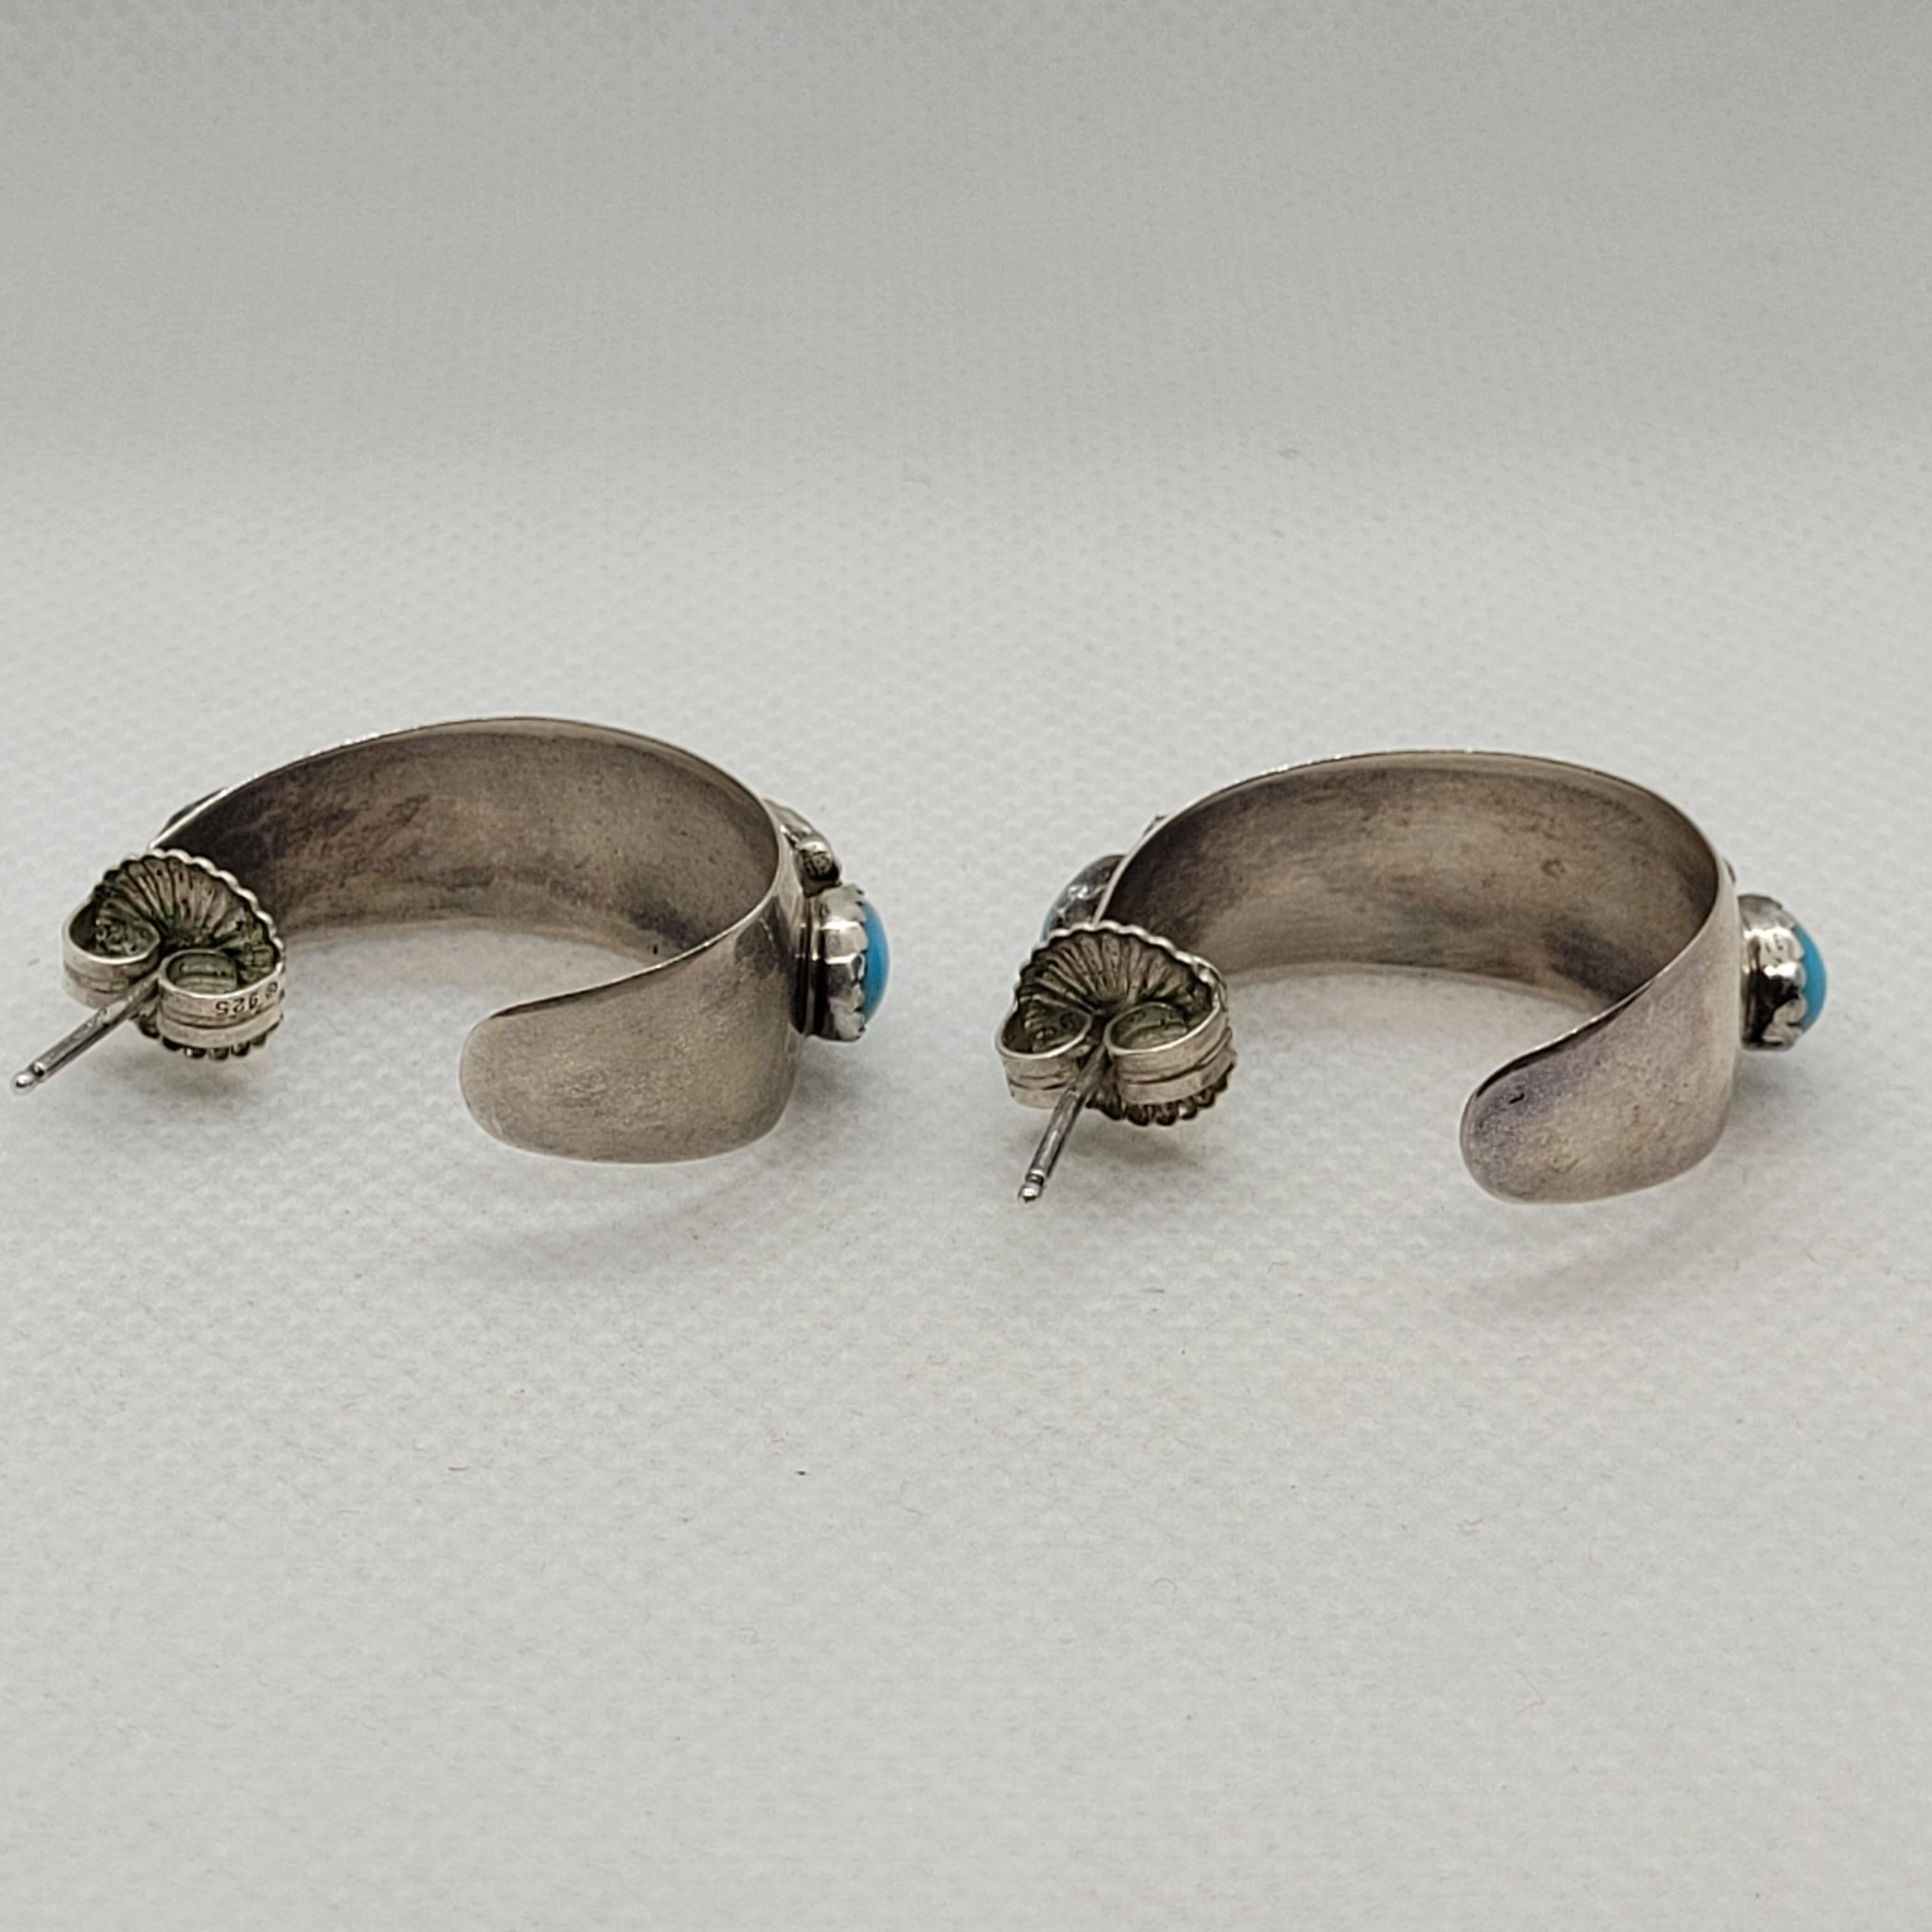 Silver Turquoise Hoop Earrings 925 Silver Half Hoop Friction Posts 10 Oval-Shape In Good Condition For Sale In Rancho Santa Fe, CA